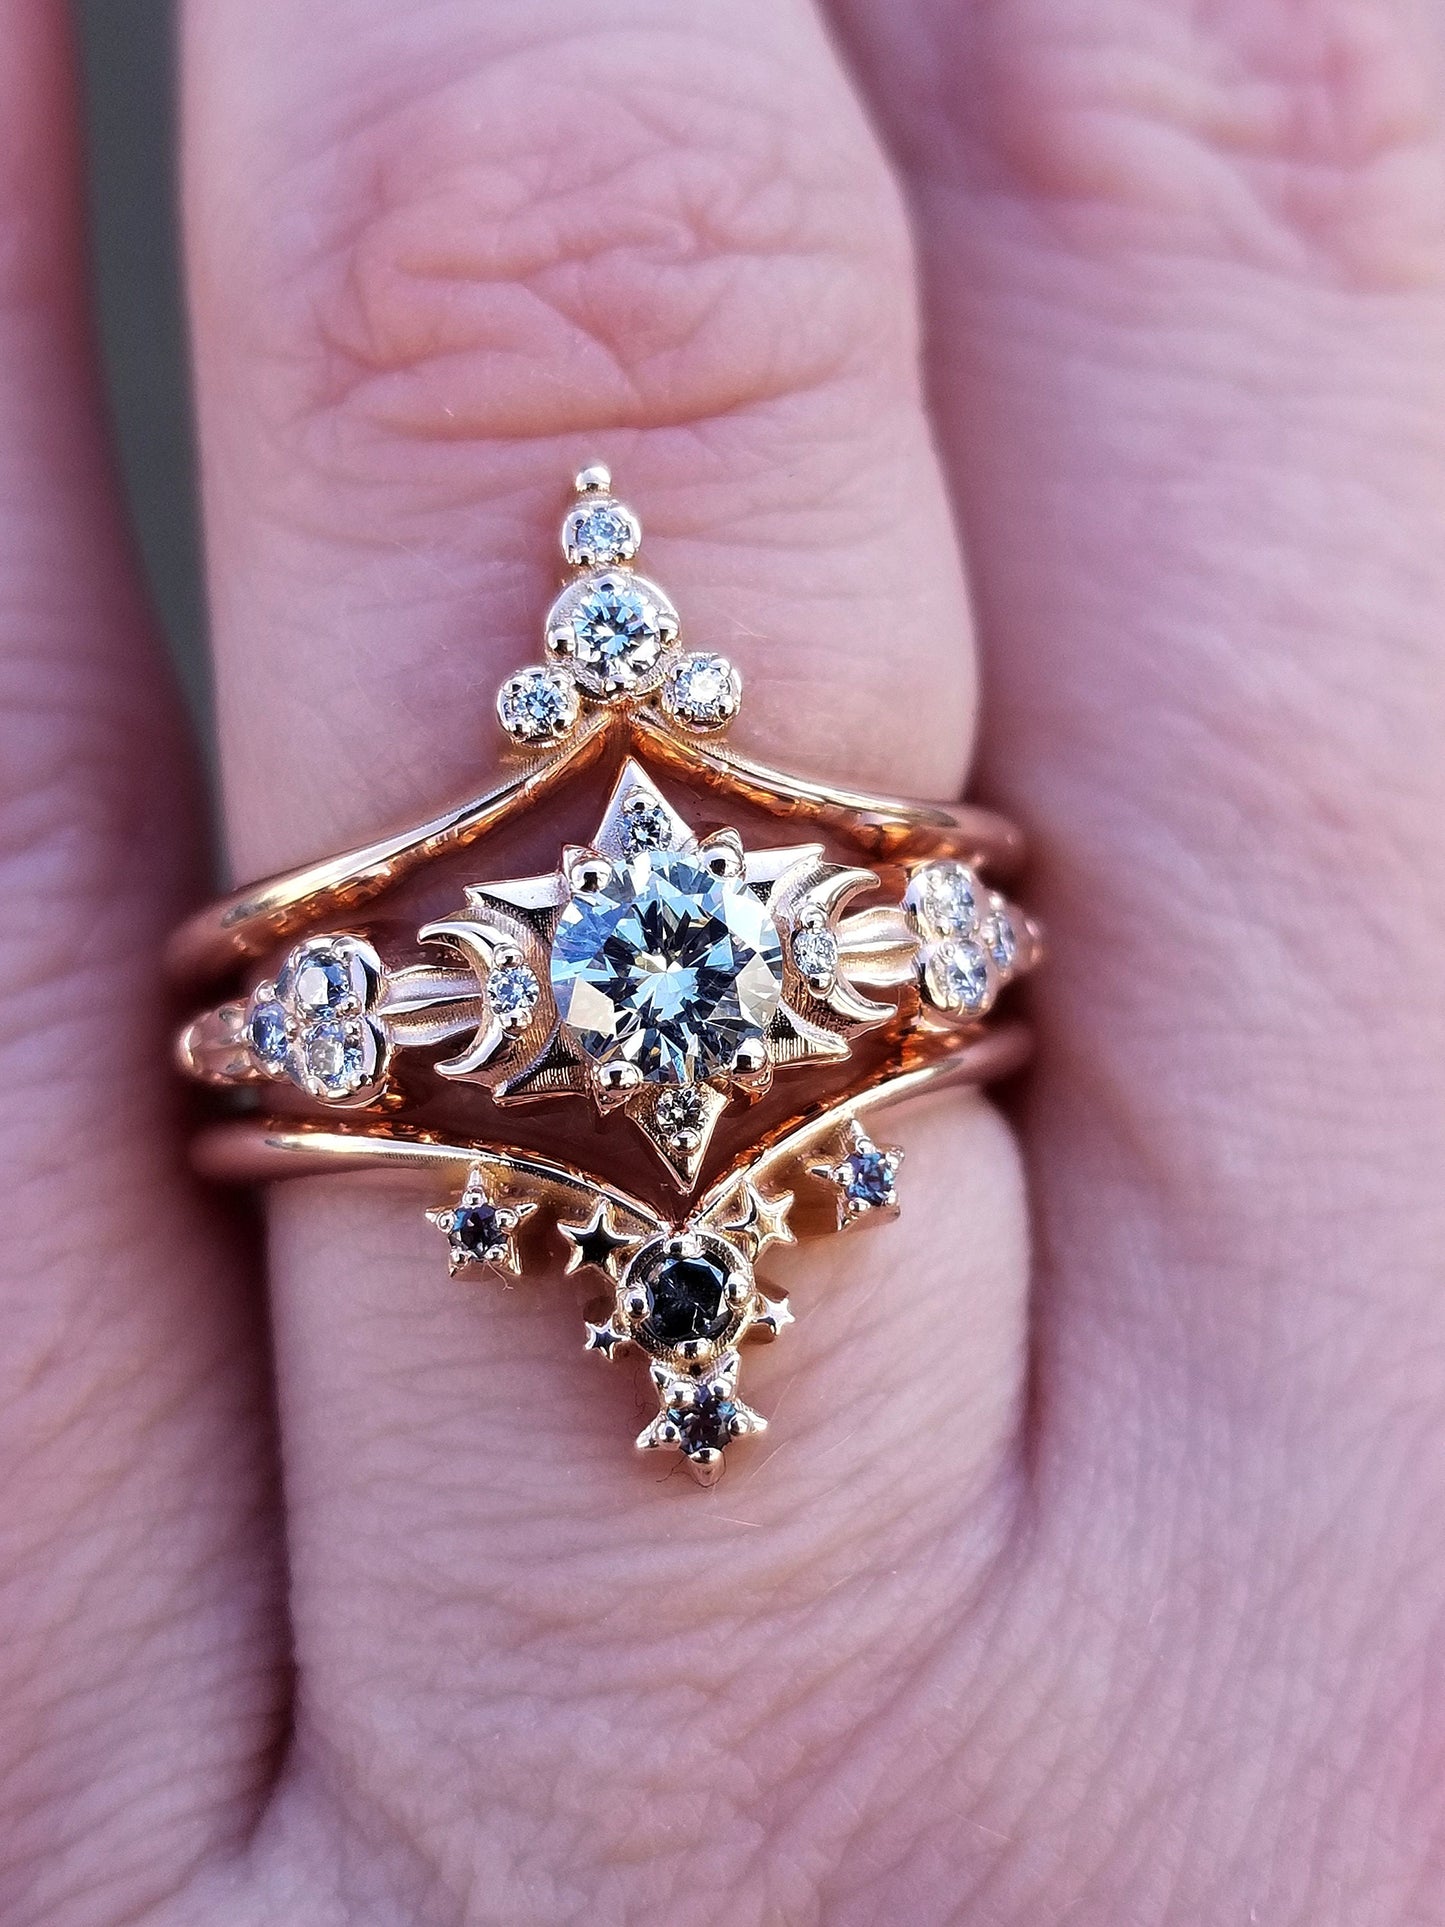 Ready to Ship Size 6 - 8 - Celestial Engagement Ring - Stars Clouds and Crescent Moons - Modern Lunar Diamond Gold Ring